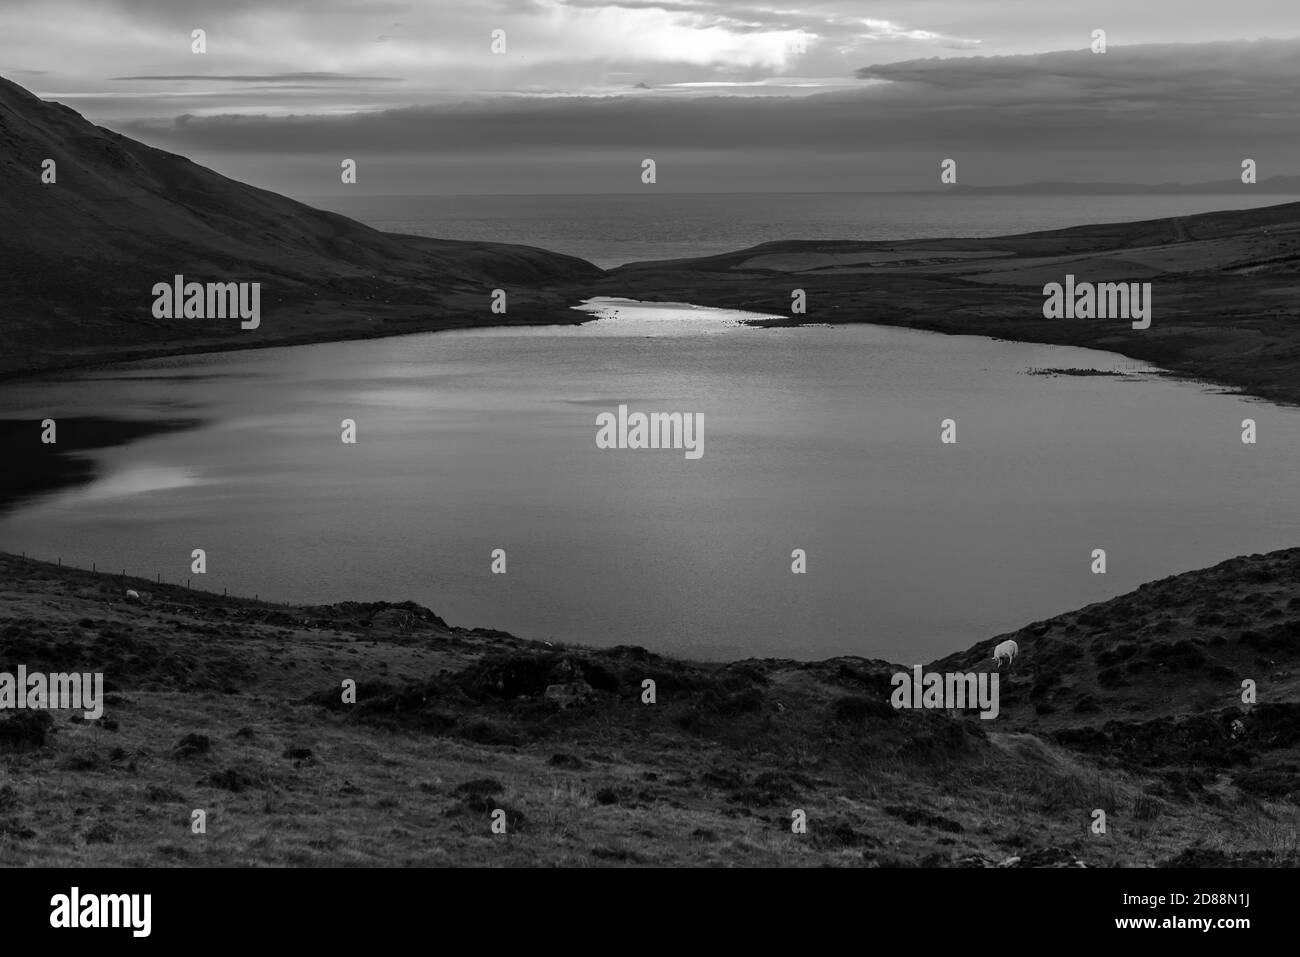 Black and white land scape of sheep grazing along lake in scotch highlands Stock Photo